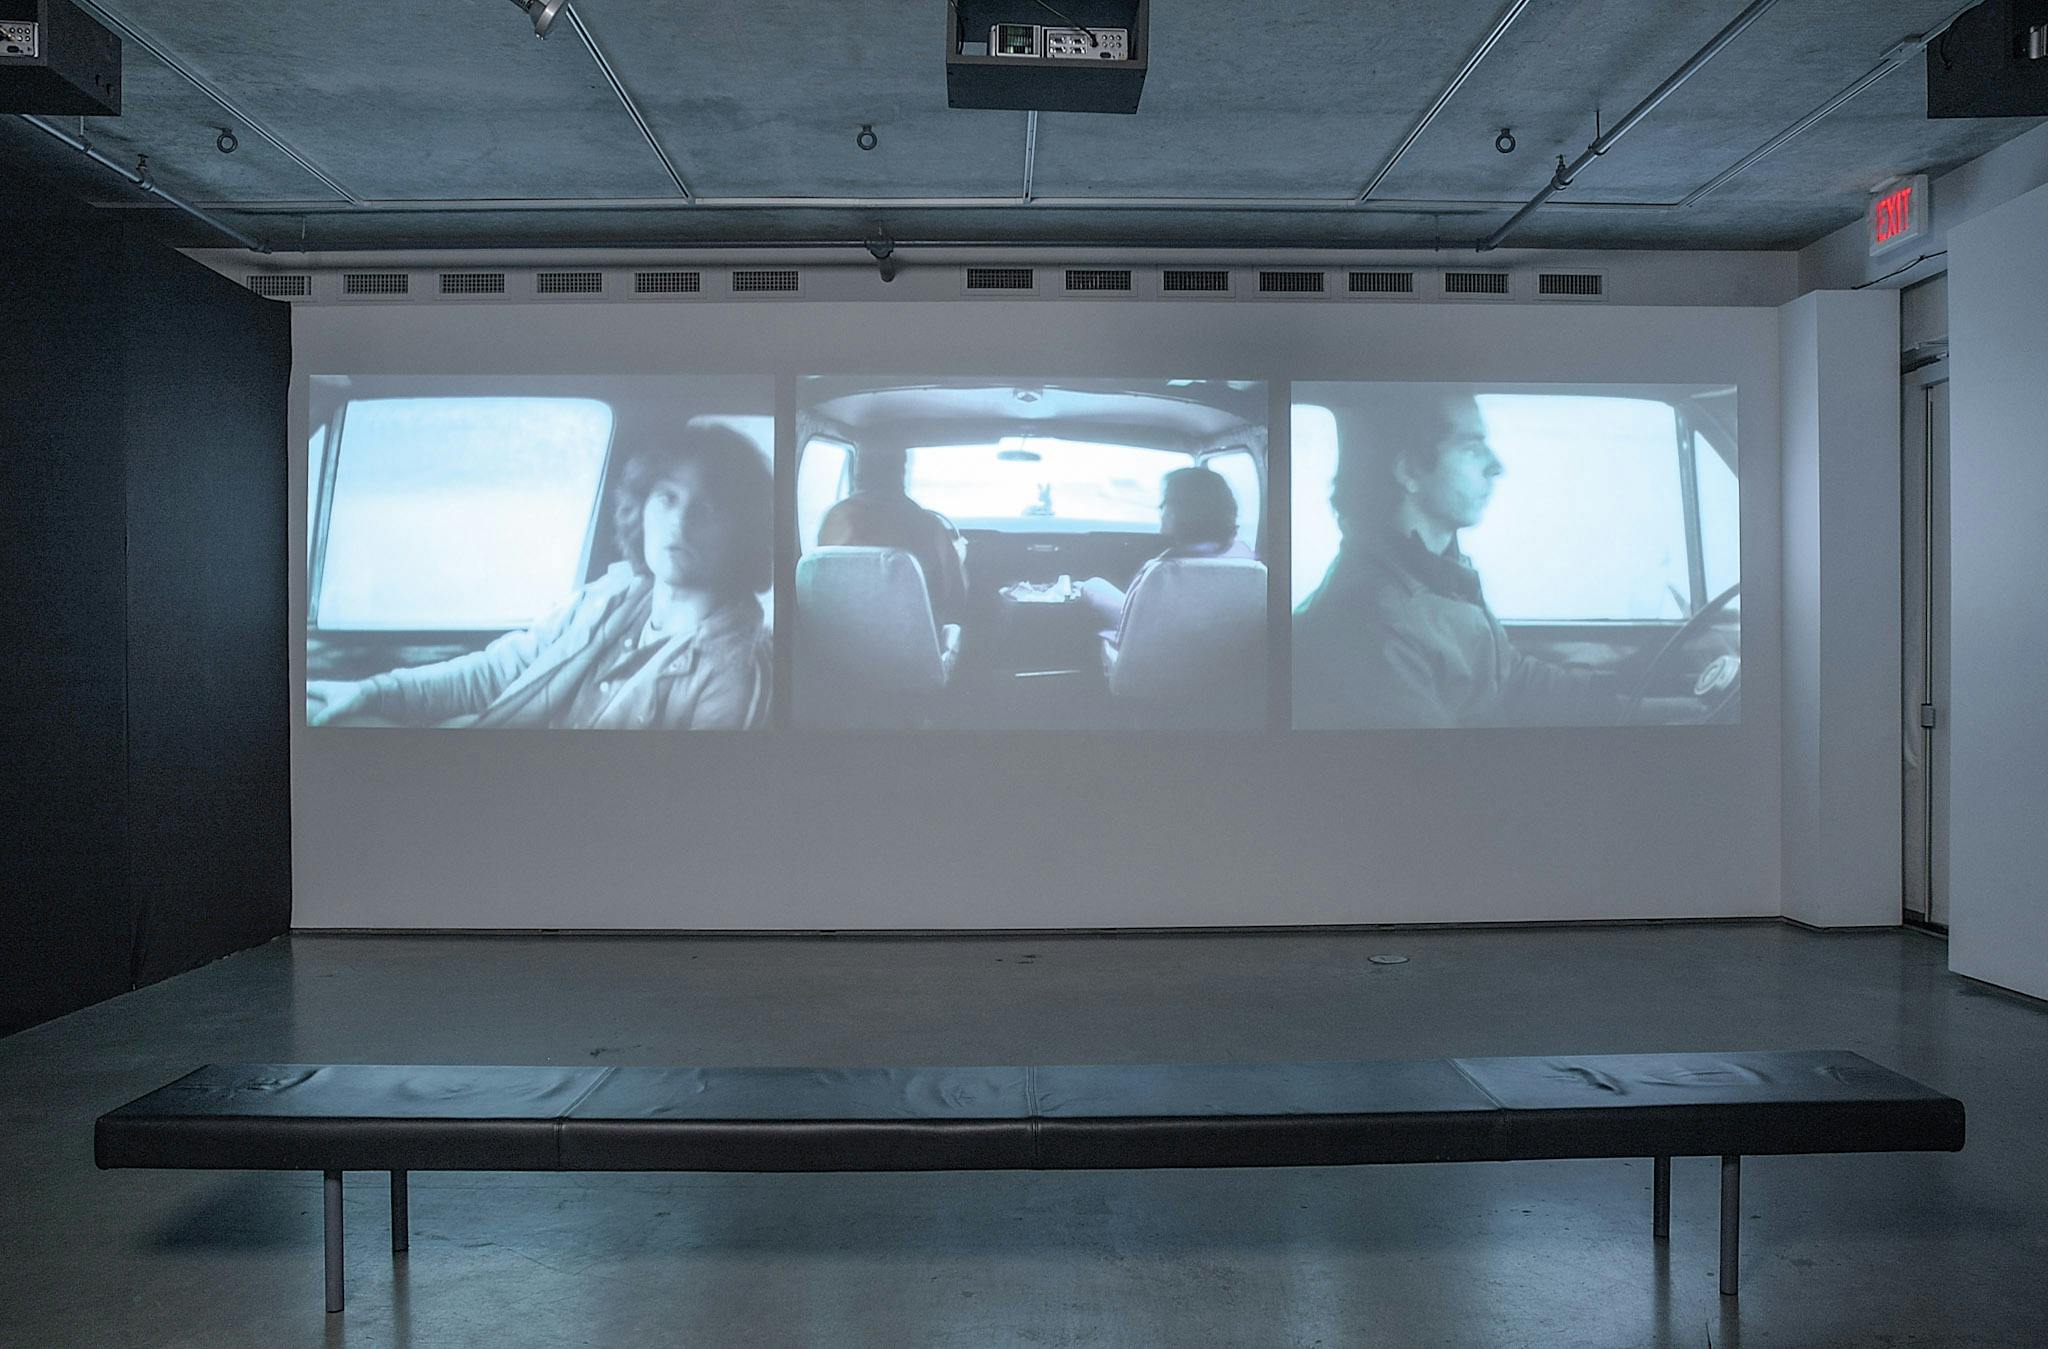 An installation image of three-channel video work projected on a gallery wall. The videos show people in a car from different angles. The middle video shows an image of two people in front seats.